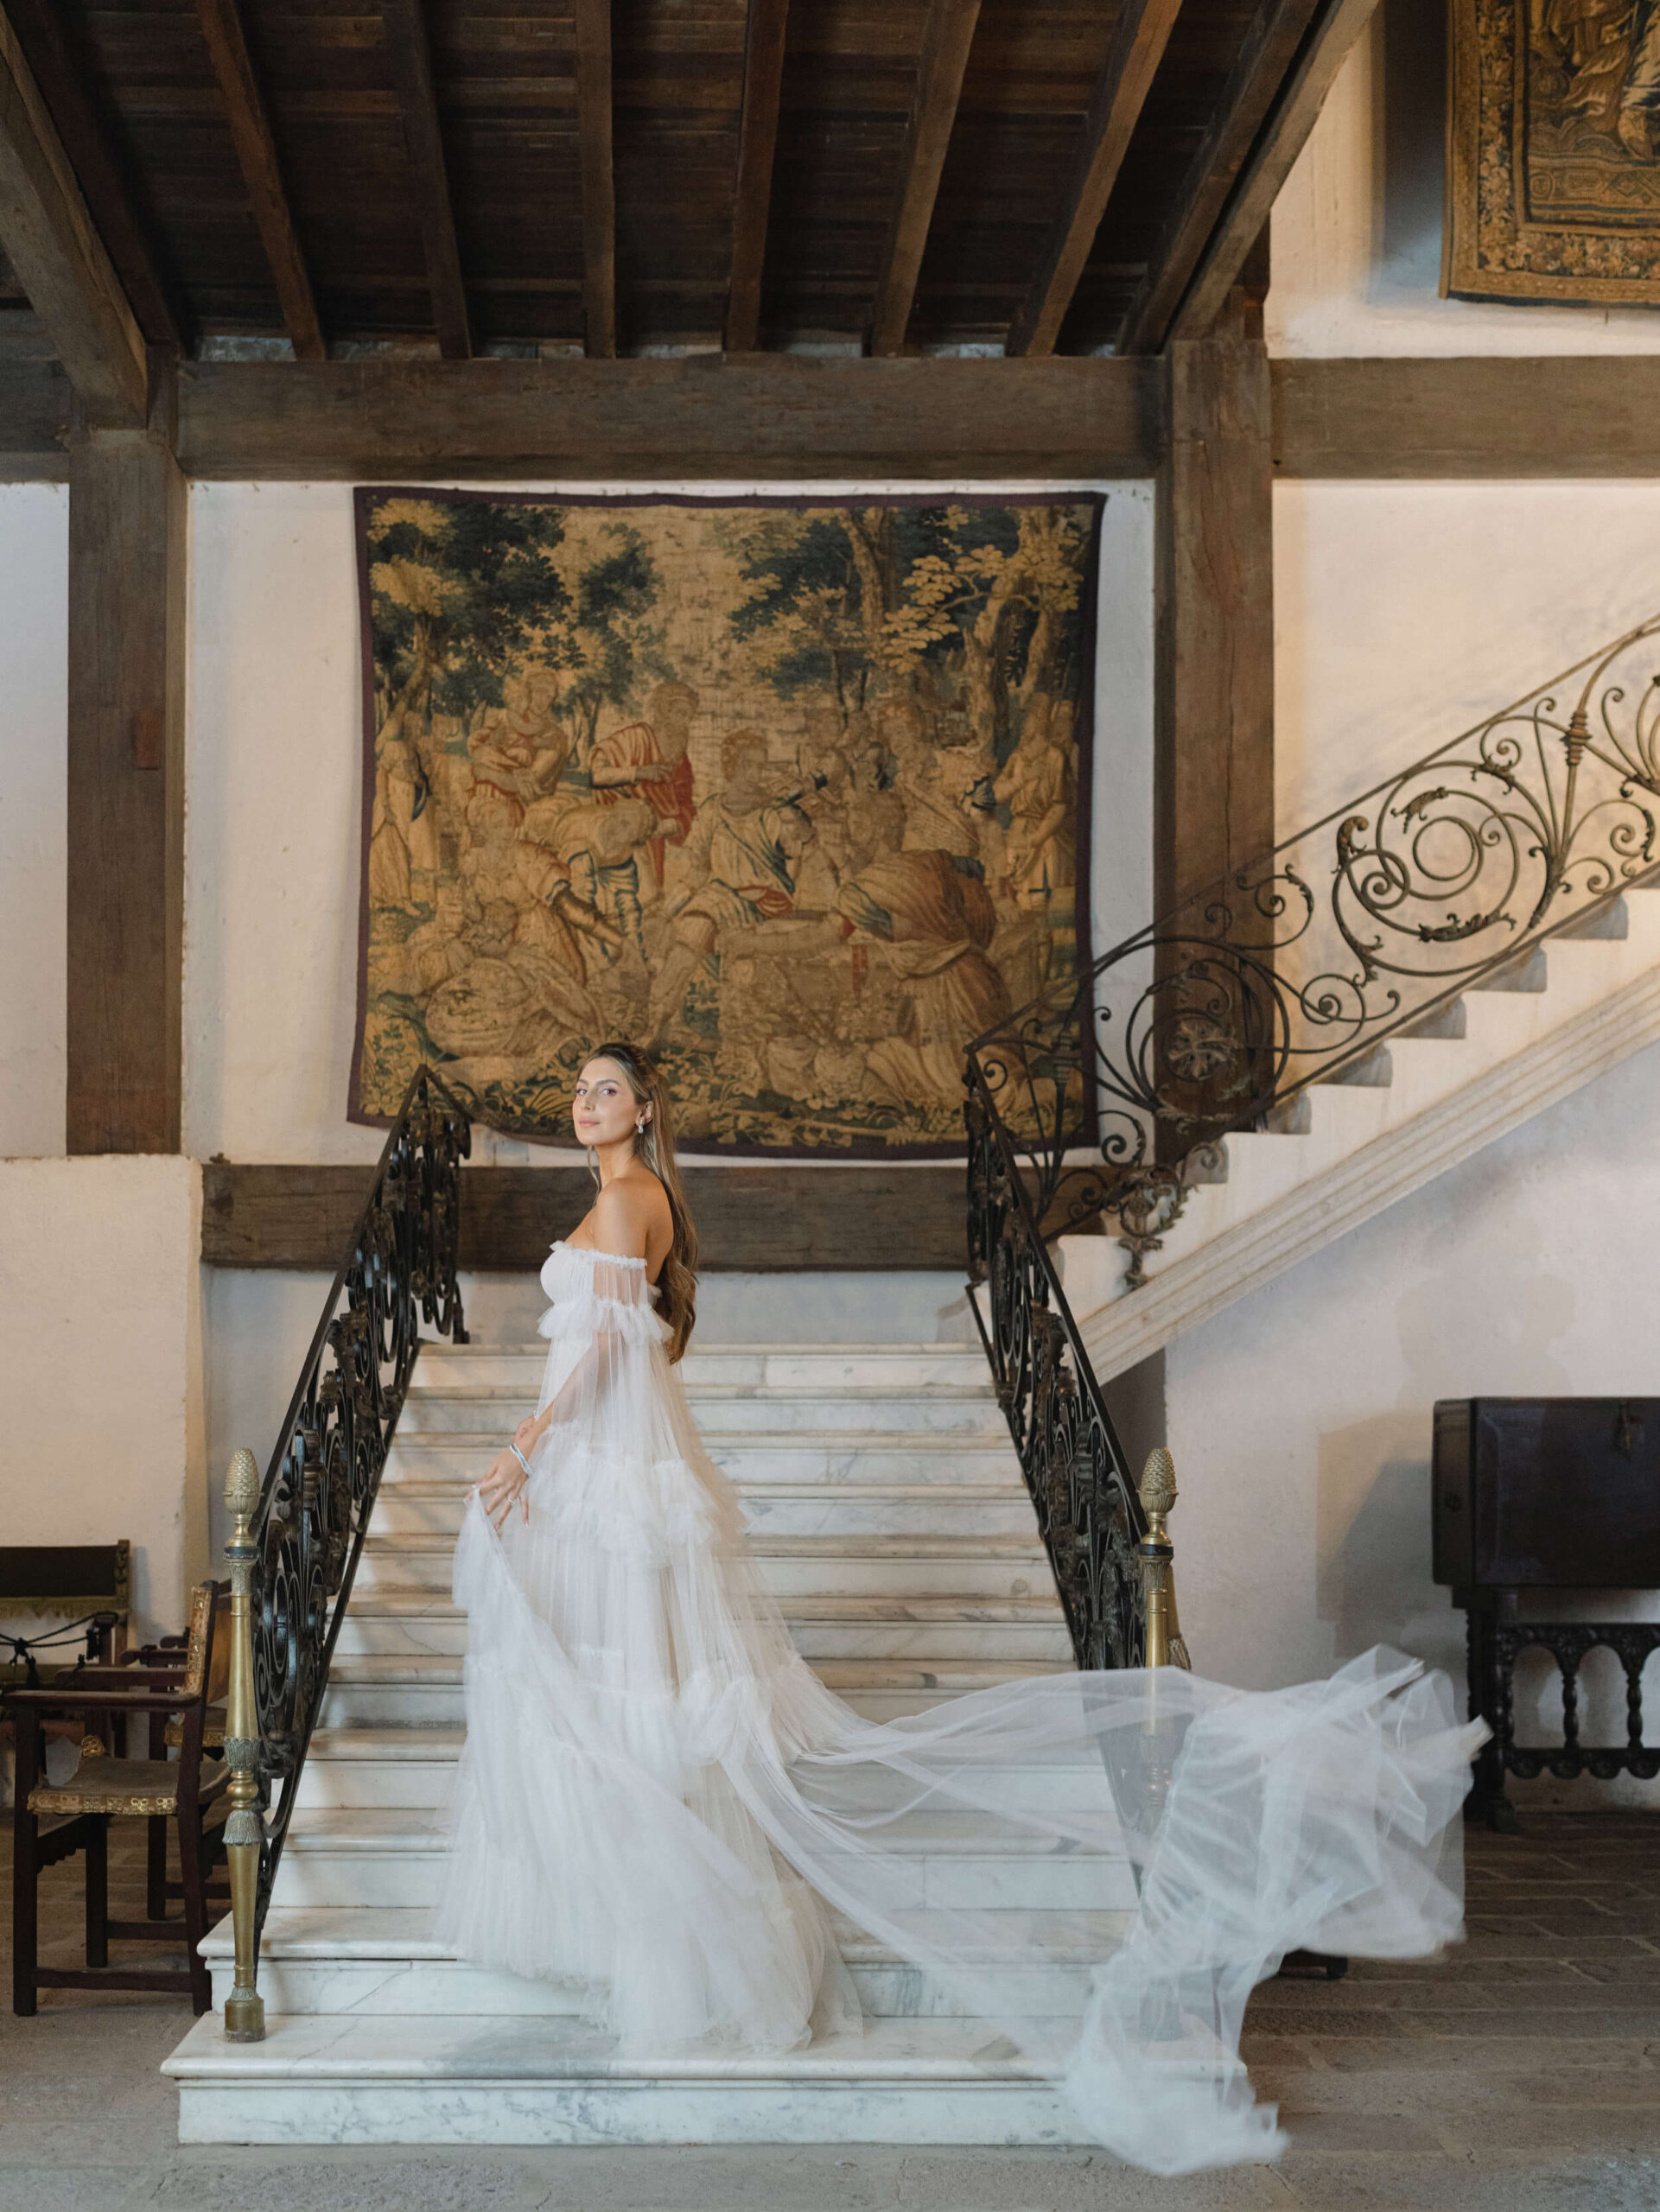 Ashley posing on the stairs at the Santa Mónica Hacienda Museum in her Vera Wang dress